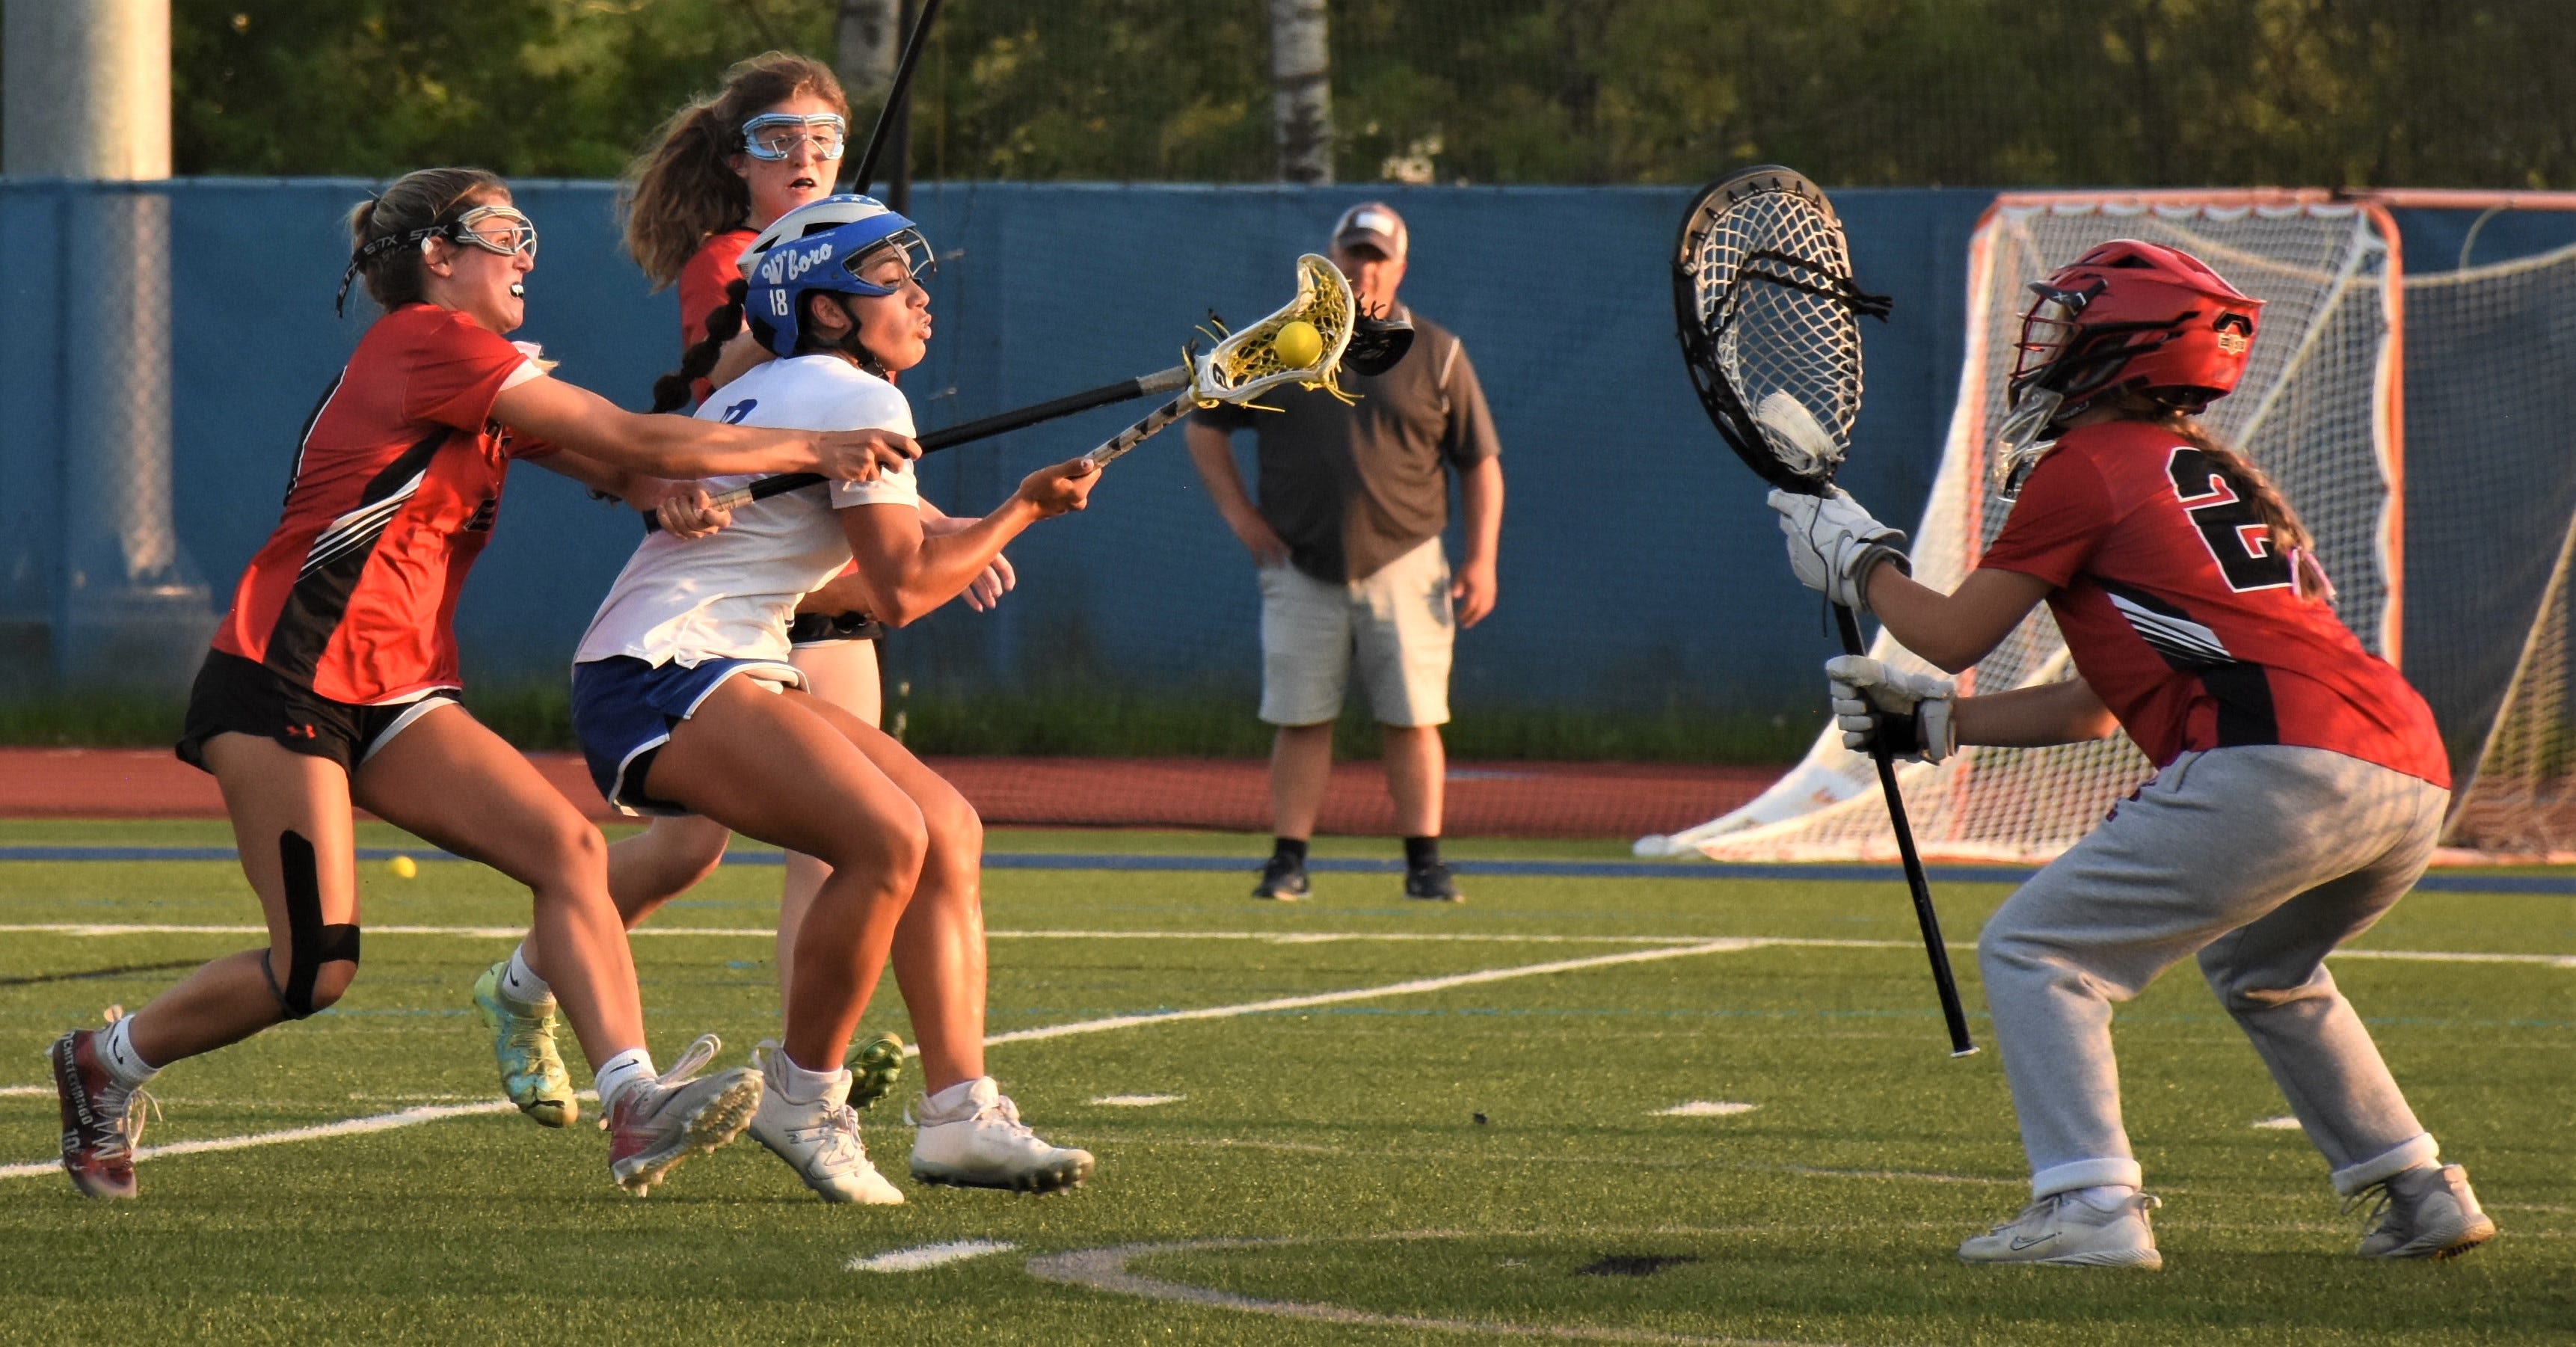 Section III girls lacrosse playoff schedule and results